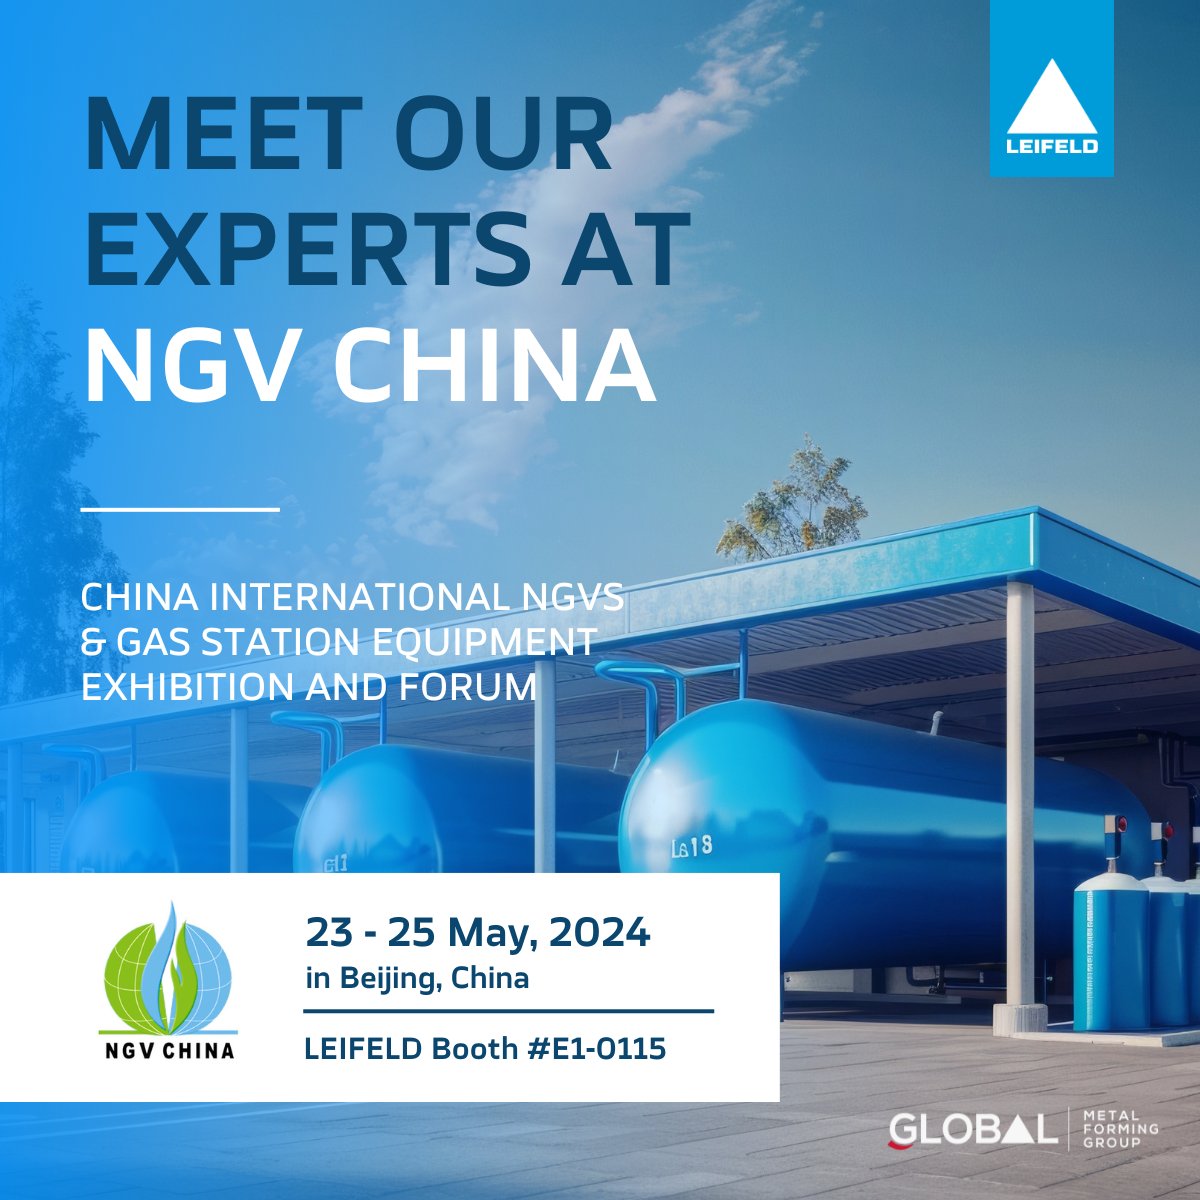 Only a few days to go! We’re gearing up for the China International NGVs & Gas Station Equipment Exhibition, happening from May 23-25, 2024, at the New China International Exhibition Center in Beijing. Meet us at the show! #NGV #GasStationEquipment #Spinning #FlowForming